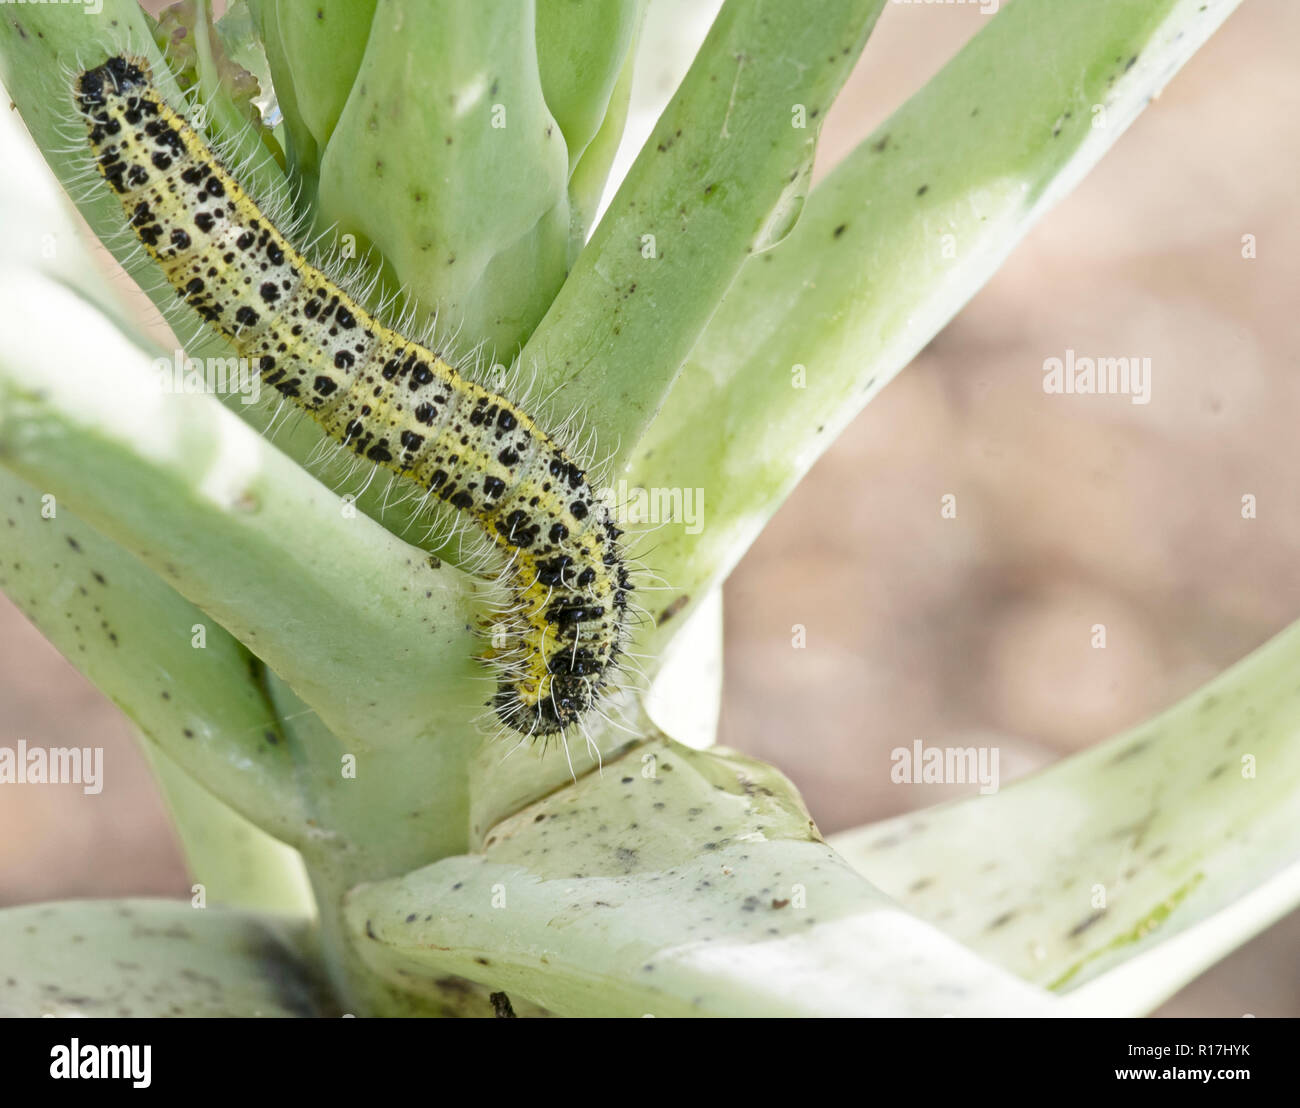 Caterpillar larva of the cabbage white butterfly Pieris brassicae, eating the leaves of a cabbage. Stock Photo